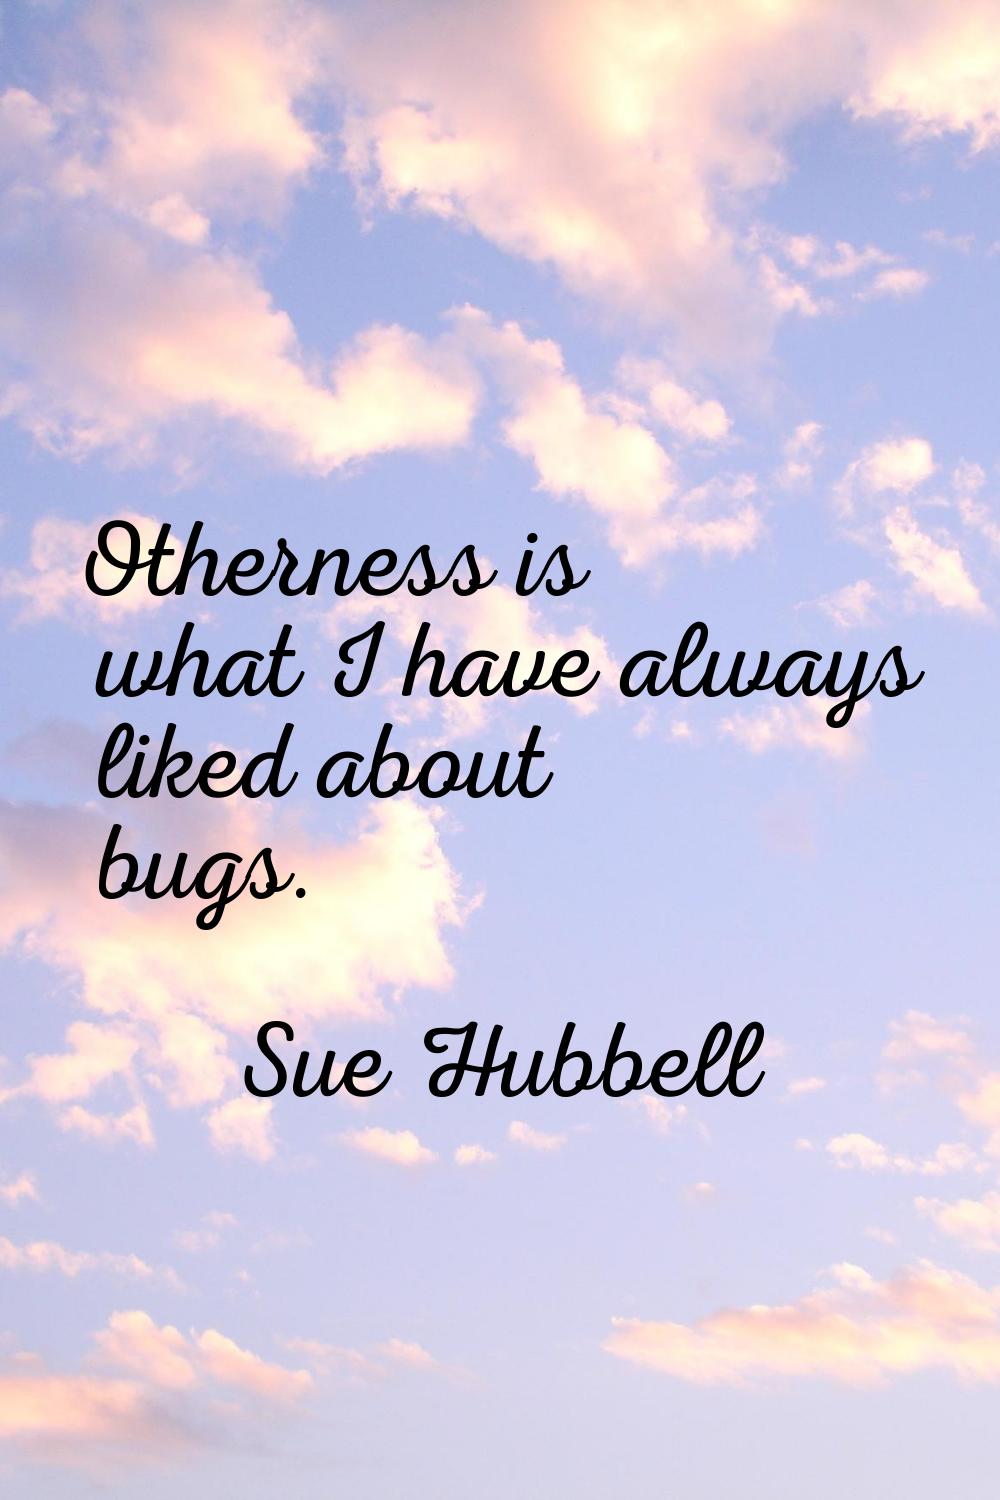 Otherness is what I have always liked about bugs.